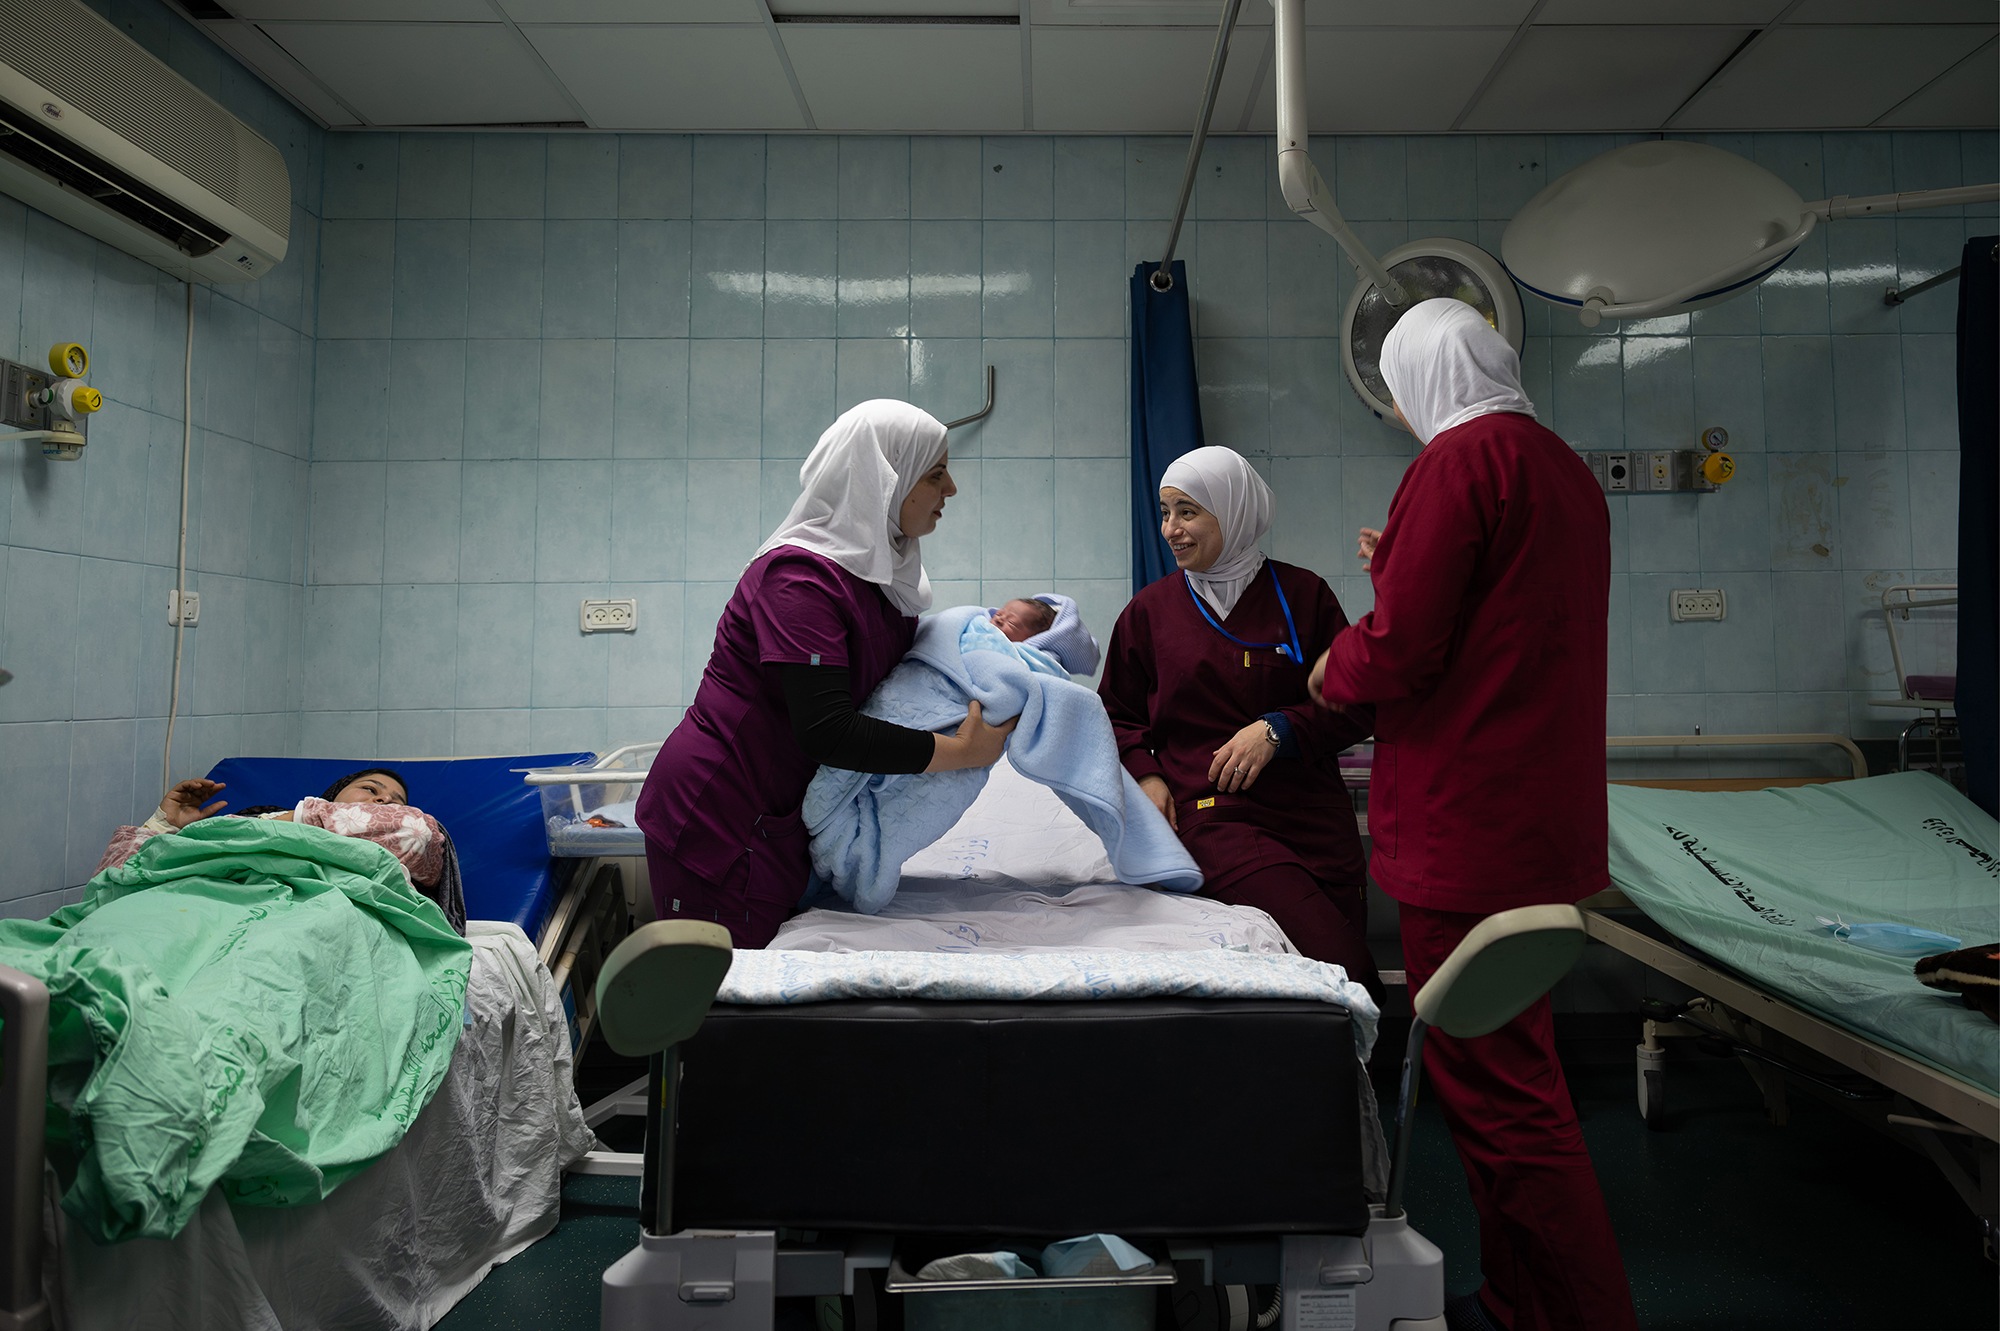 Three women stand in a hospital operating room, one holding a newborn baby. A woman lays on a hospital bed, watching.